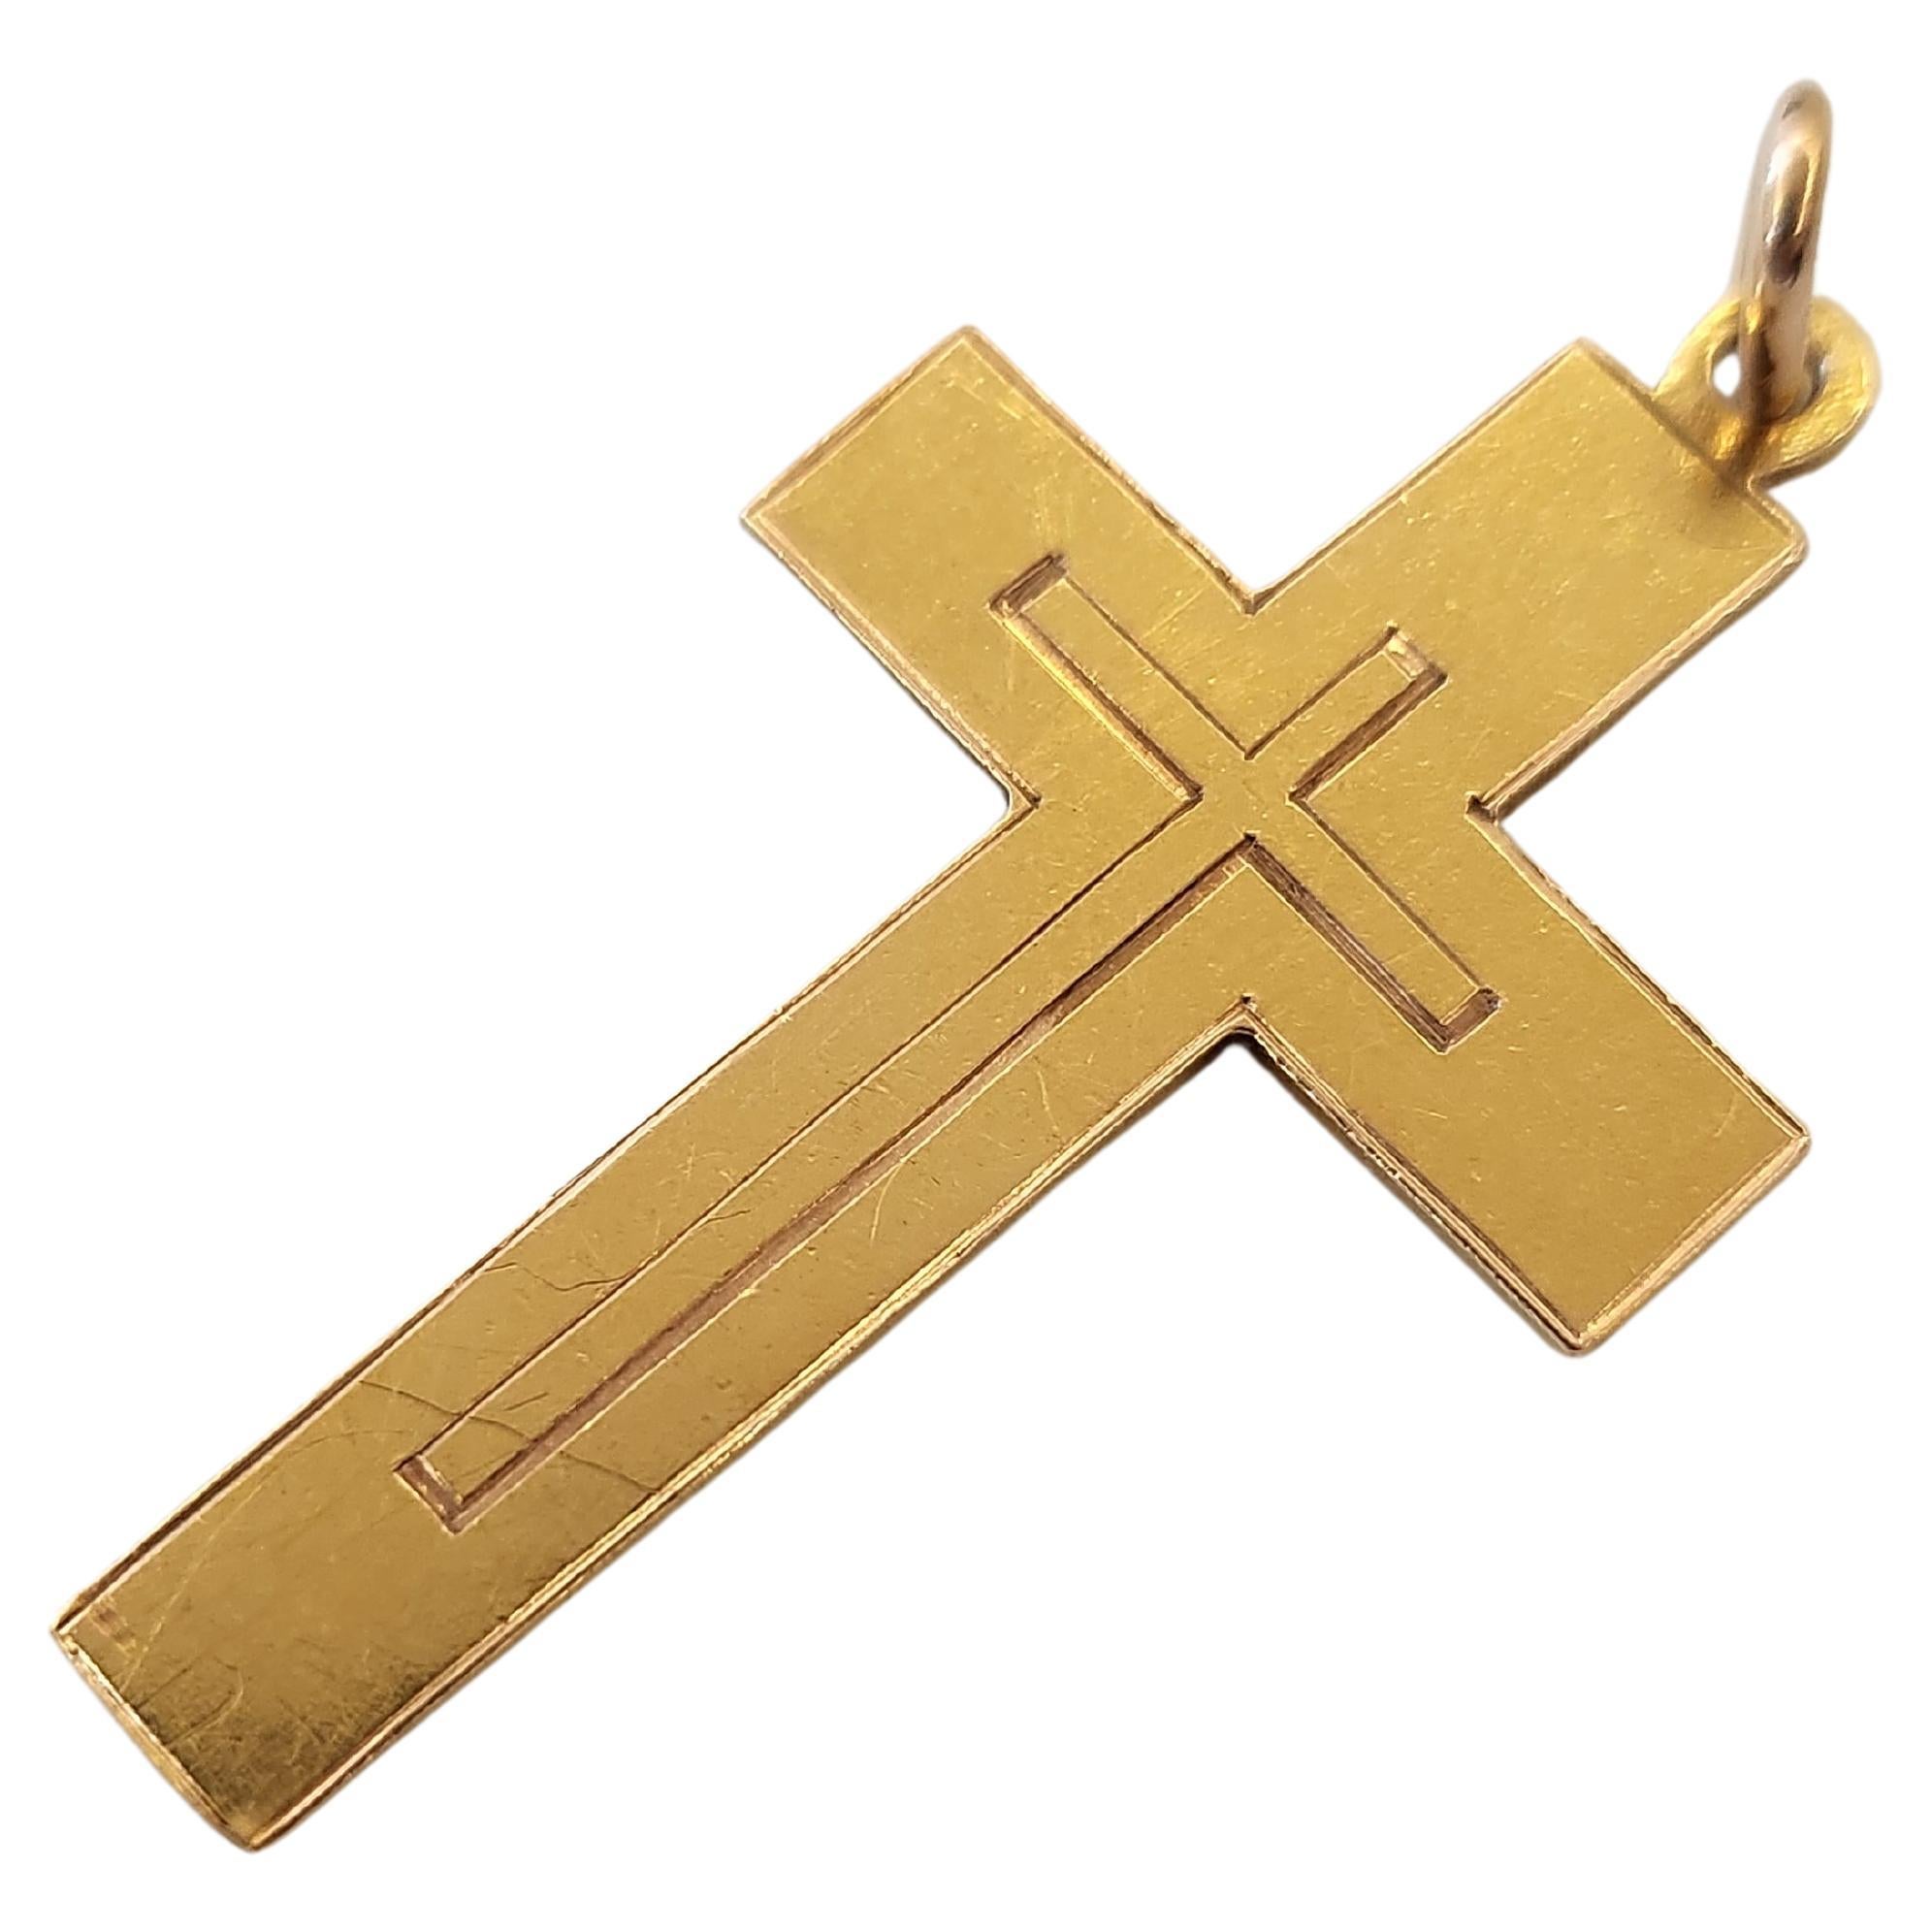 Antique russian cross pendant in 14k yellow gold ingraved on back (spaci sokrani) or save and protect cross was made in moscow 1907/1910.c imperial russian era total cross lenght is 4.5cm hall marked 56 imperial russian gold standard and moscow